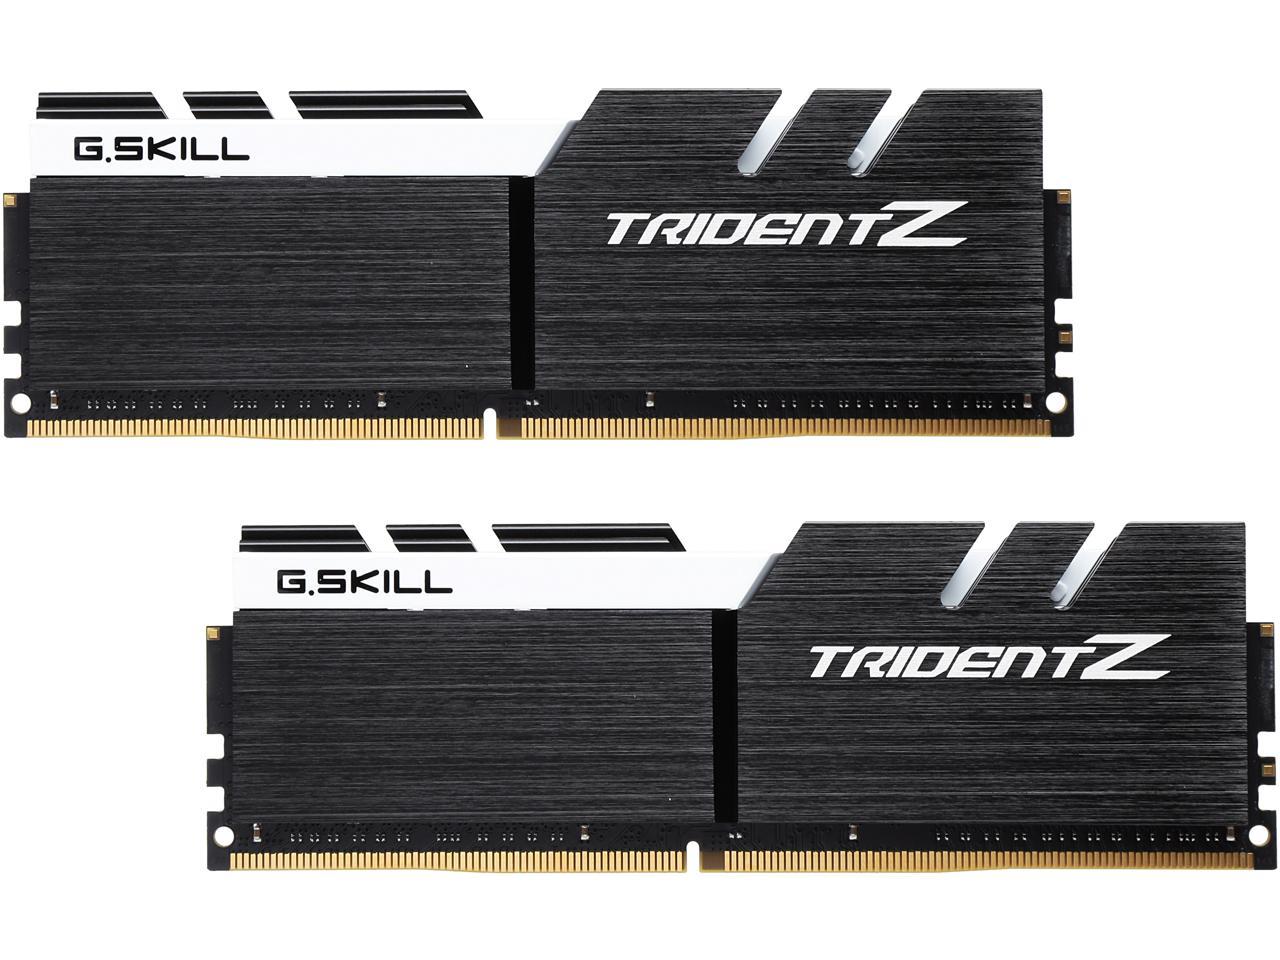 Newegg - G.SKILL Aegis 32GB RAM for $95.99, Trident Z-Series 64GB for $214.49, and more